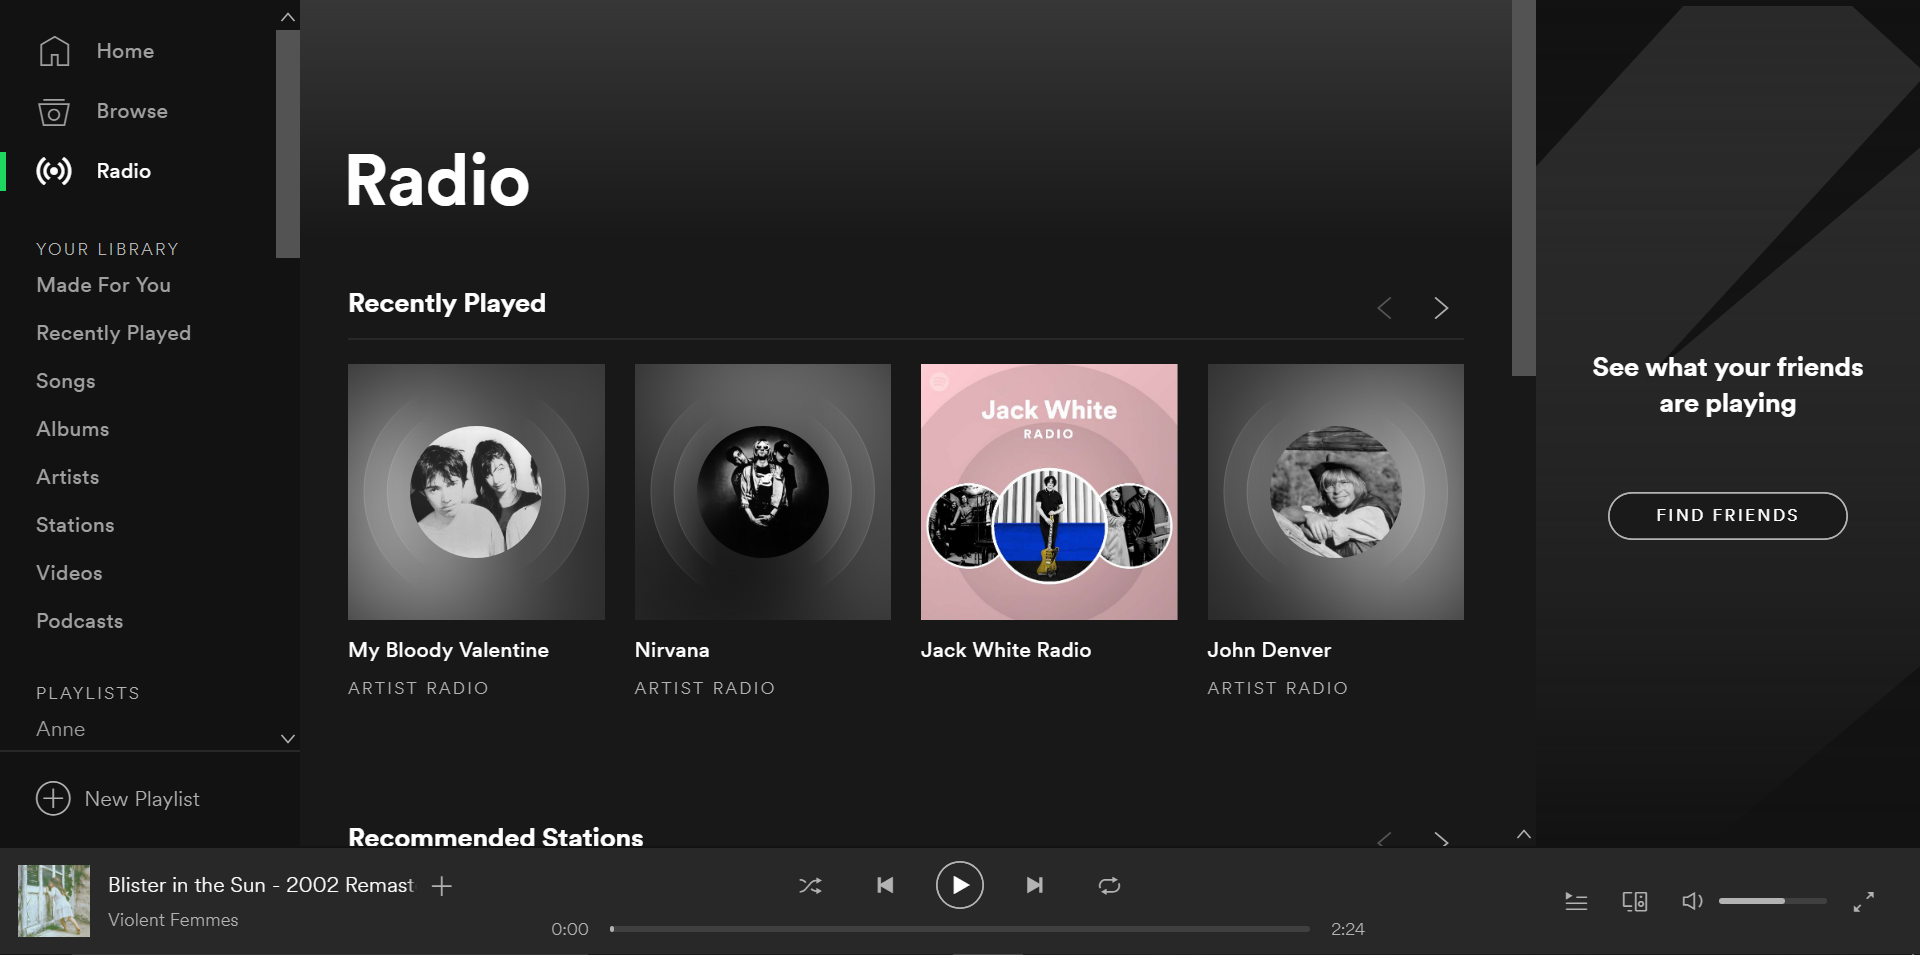 Create New Station" disappeared? - The Spotify Community